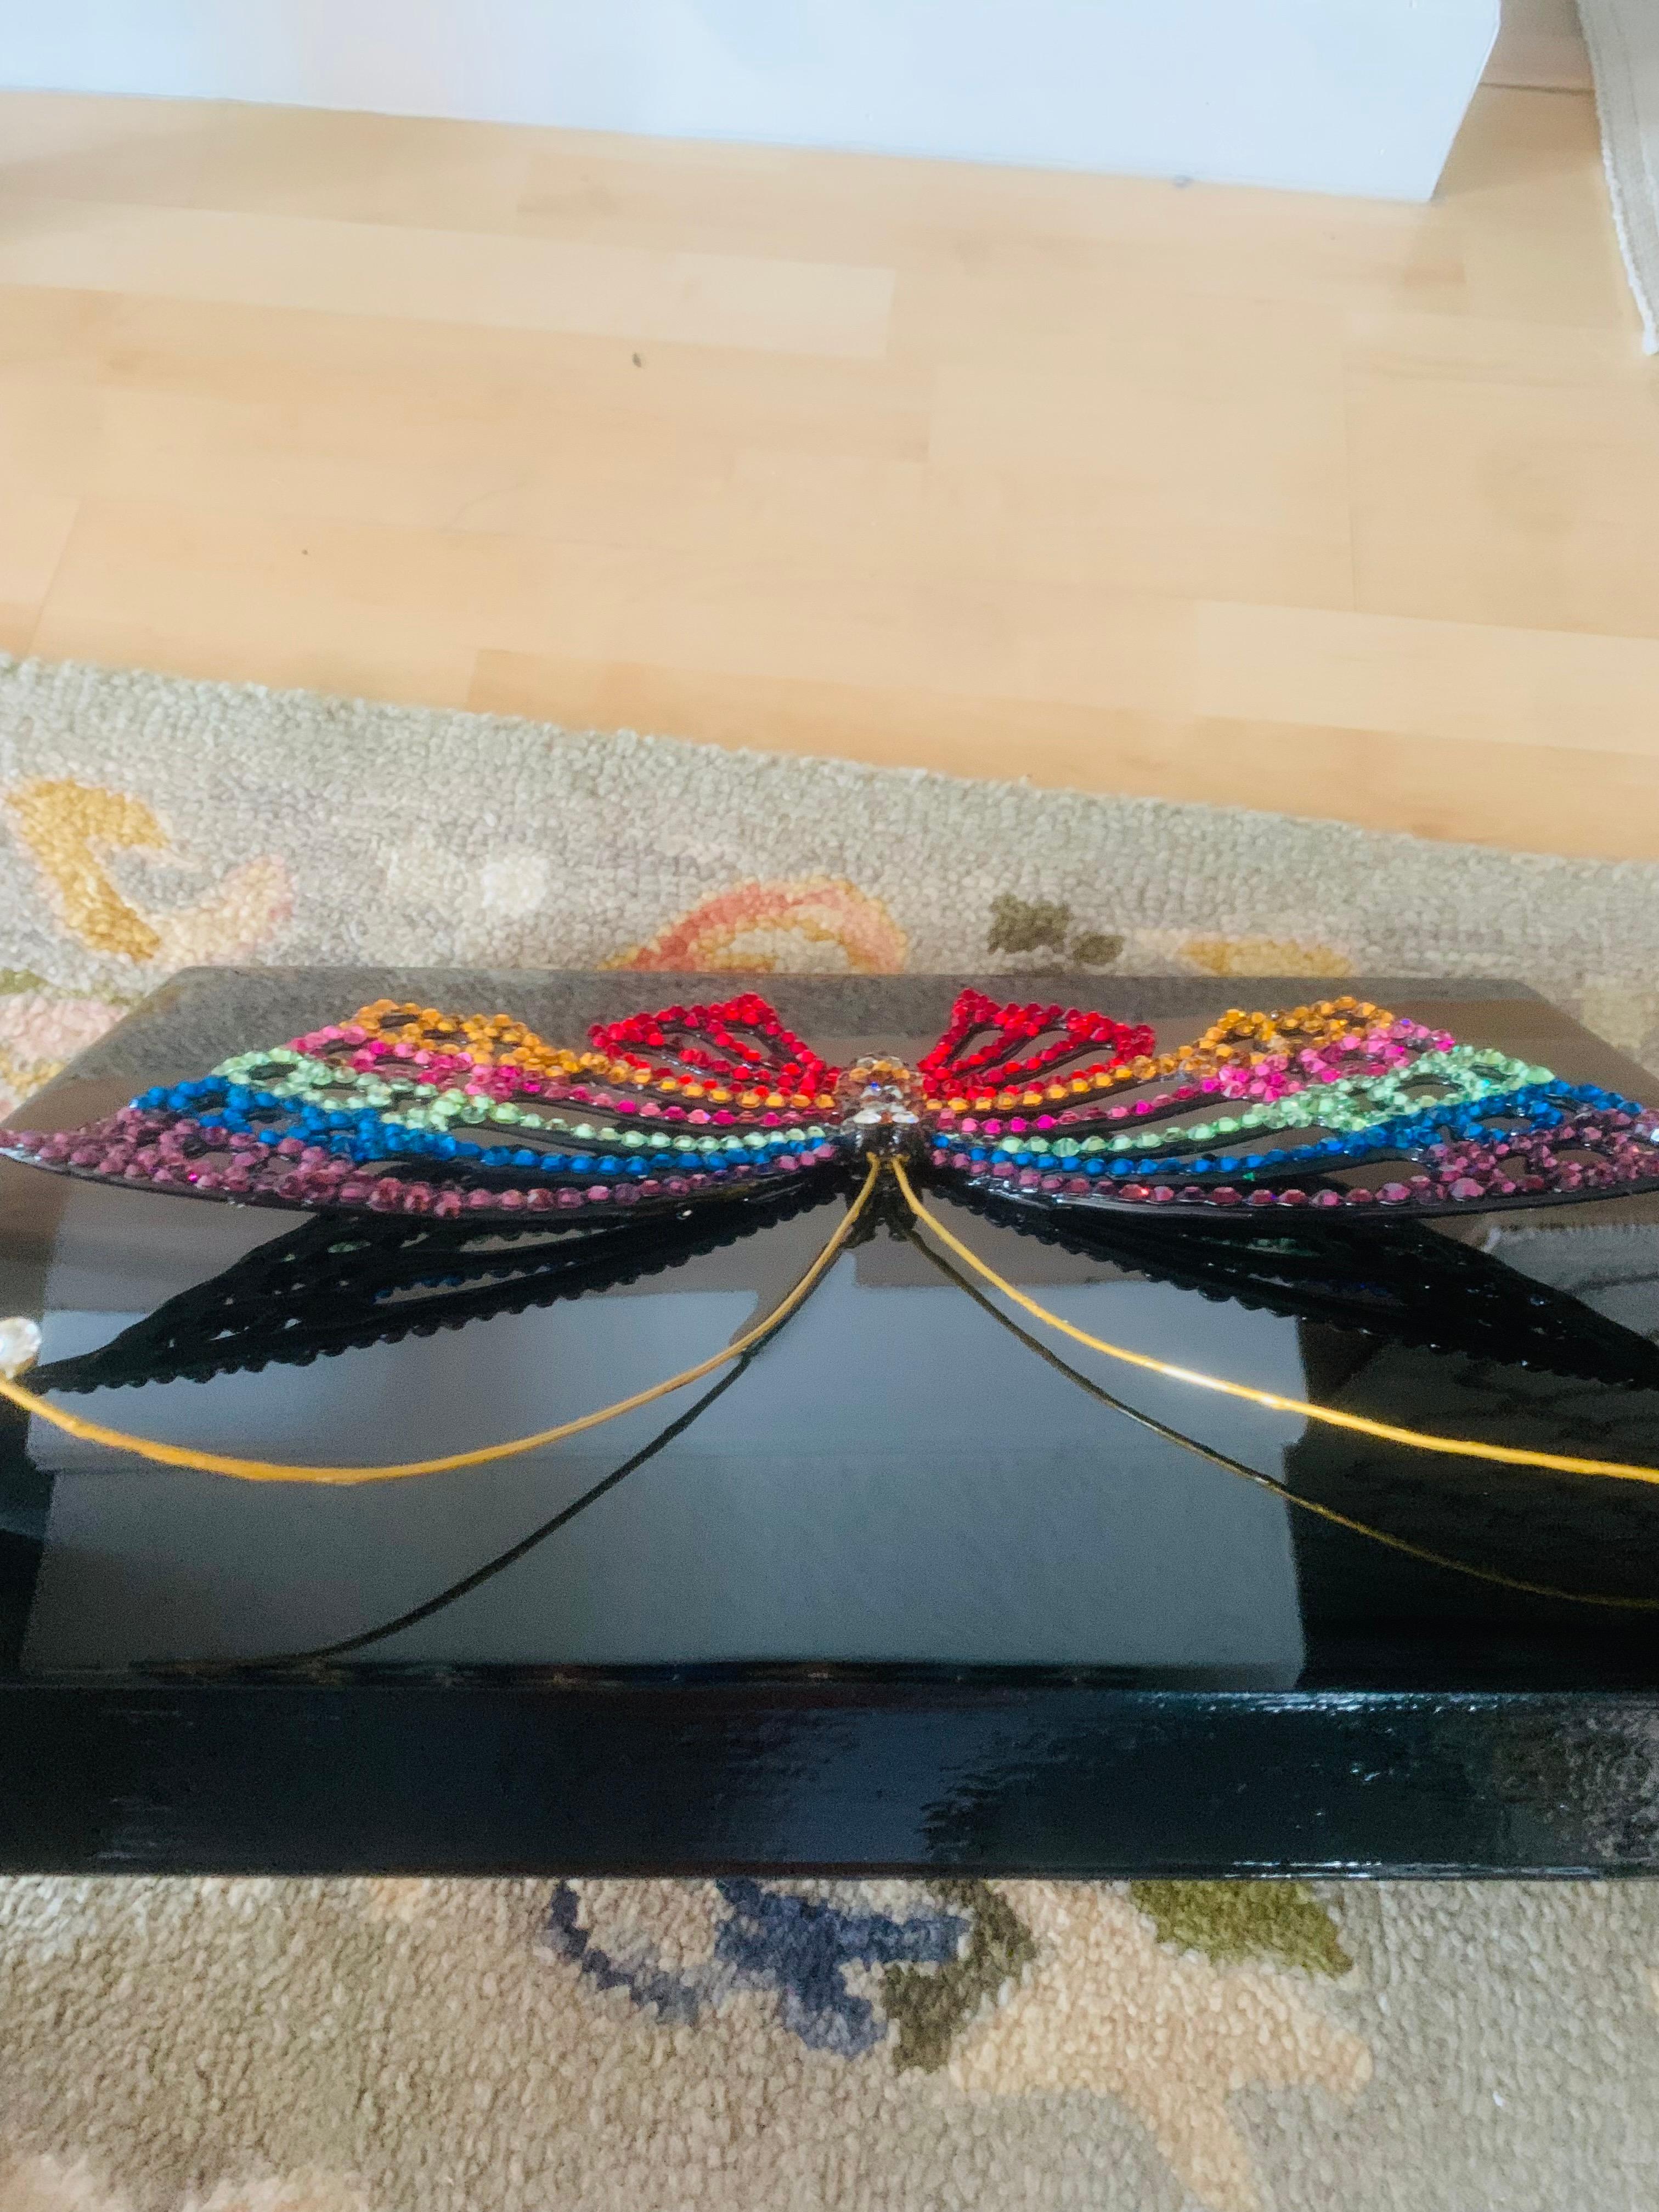 PRIDE BUTTERFLY (One of a Kind Swarovski Mixed Media Sculpture) 10